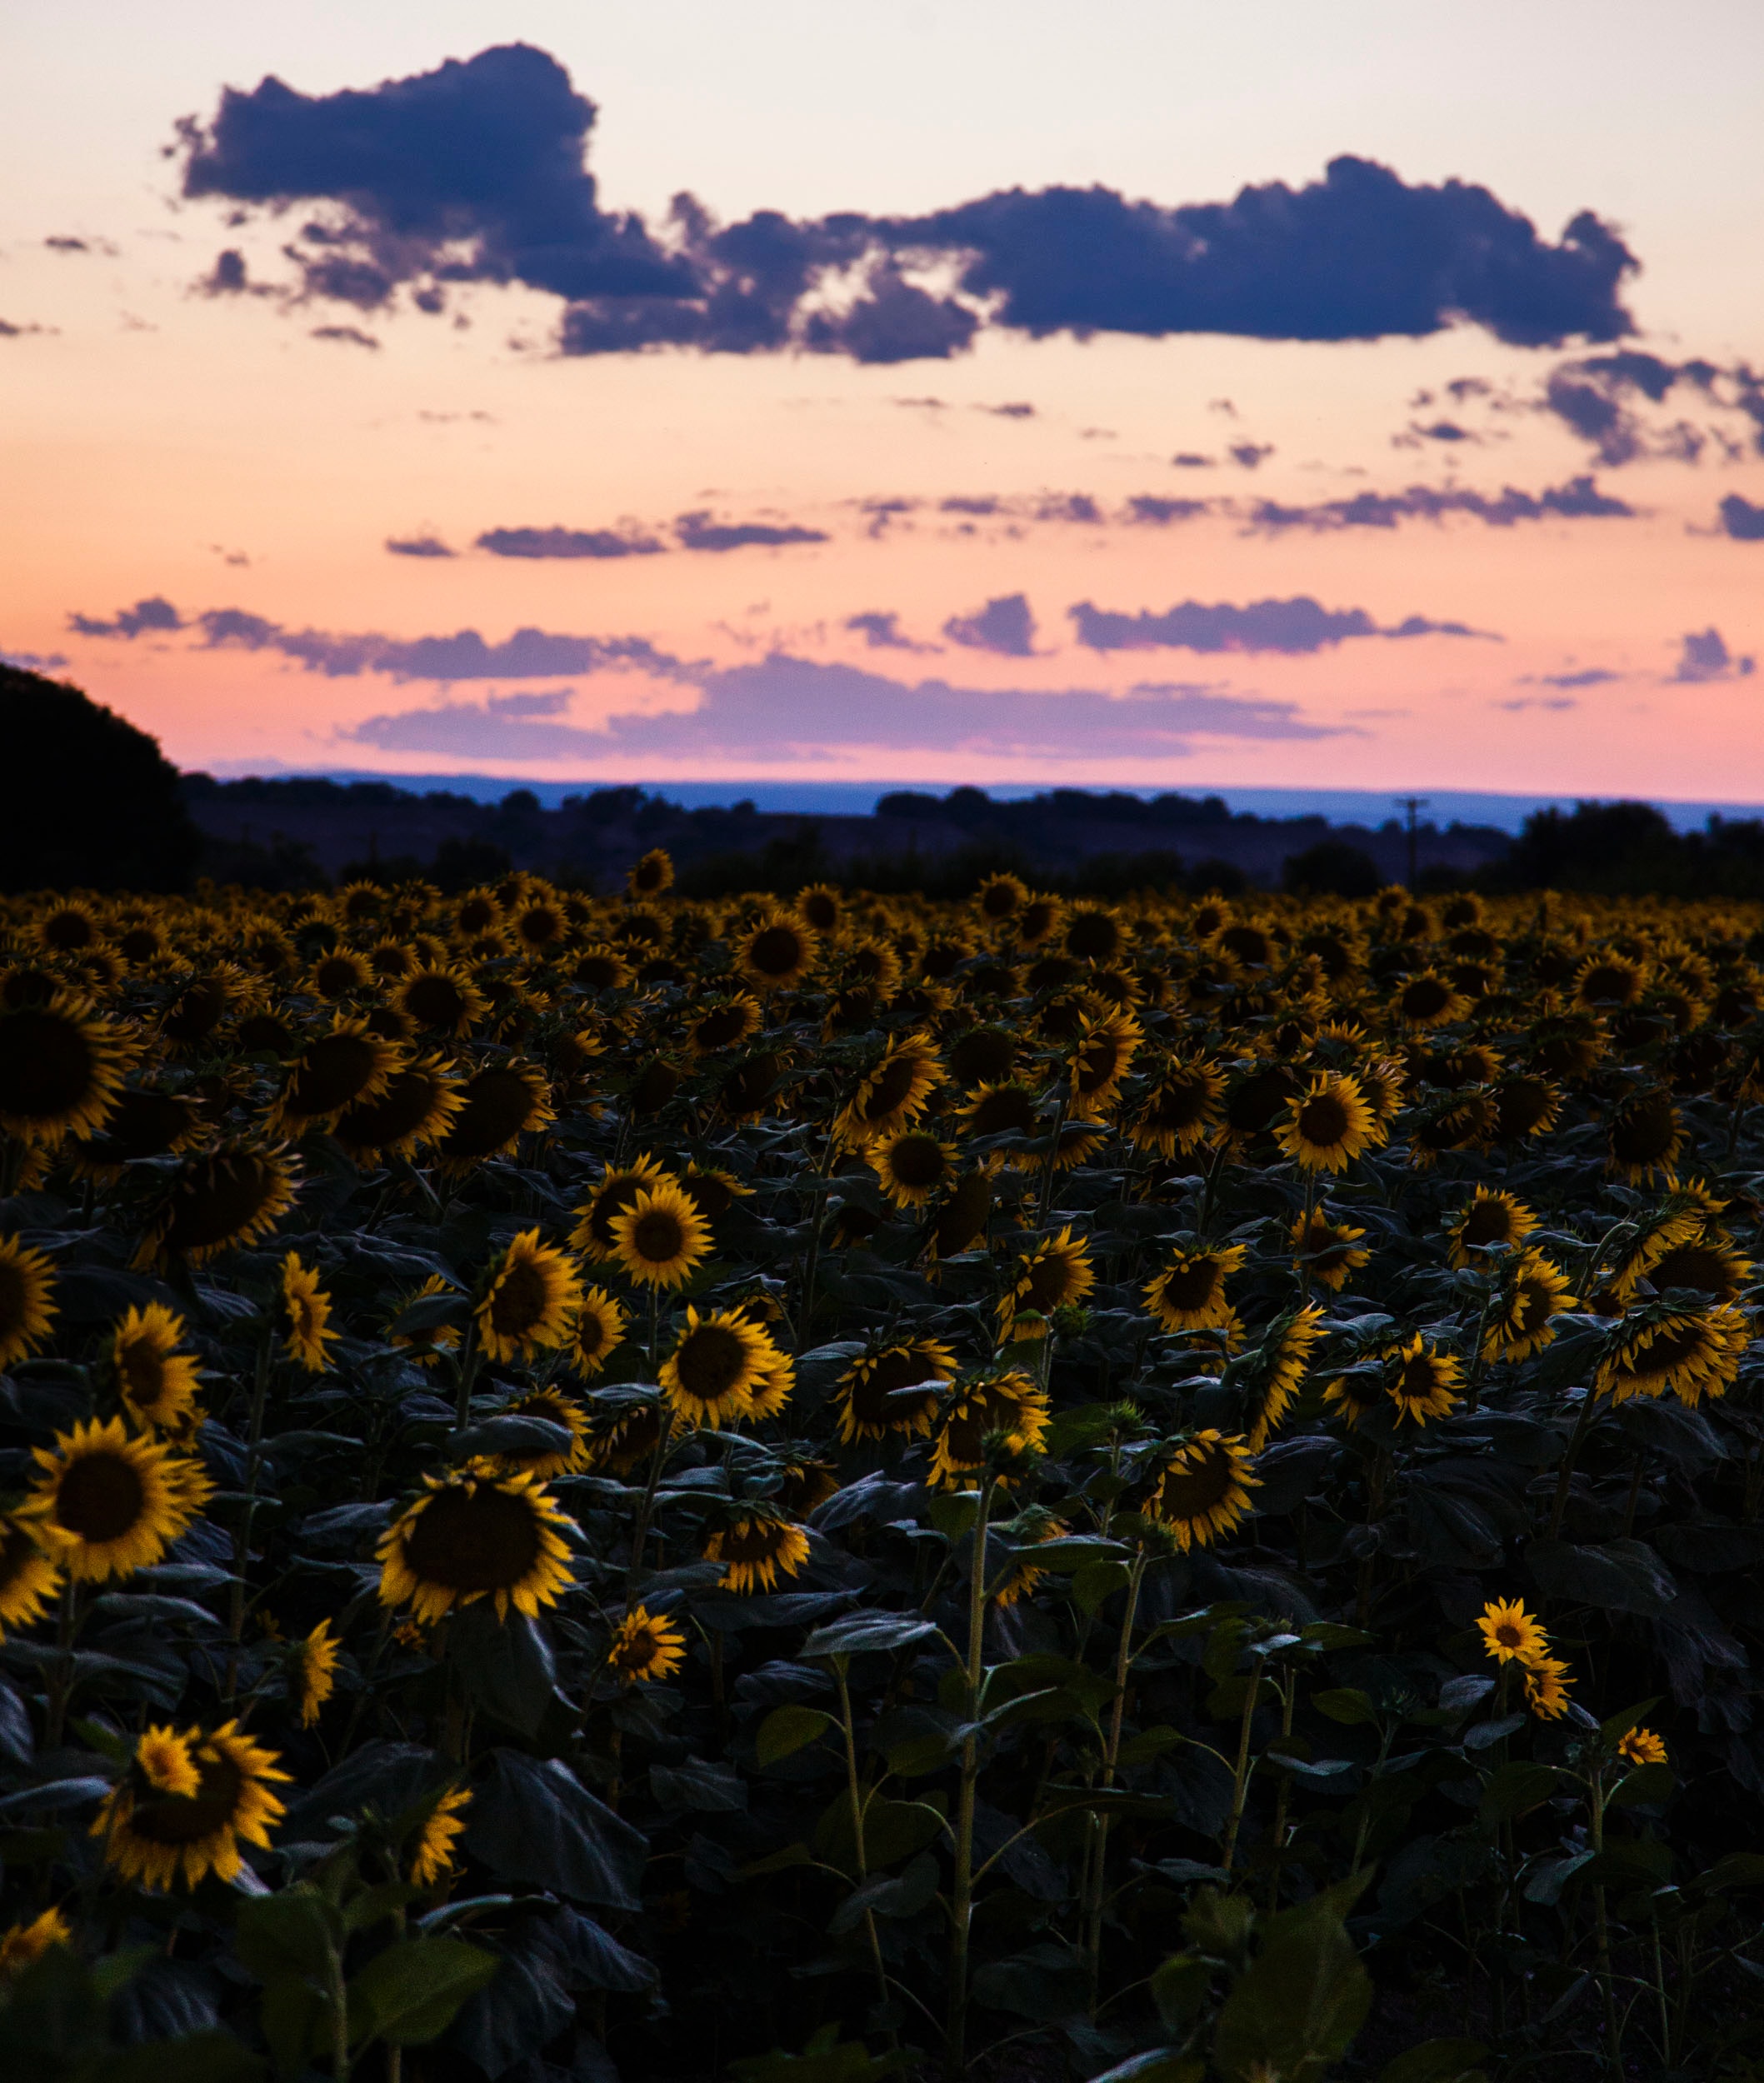 68148 download wallpaper miscellaneous, sunset, sunflowers, sky, miscellanea, field screensavers and pictures for free